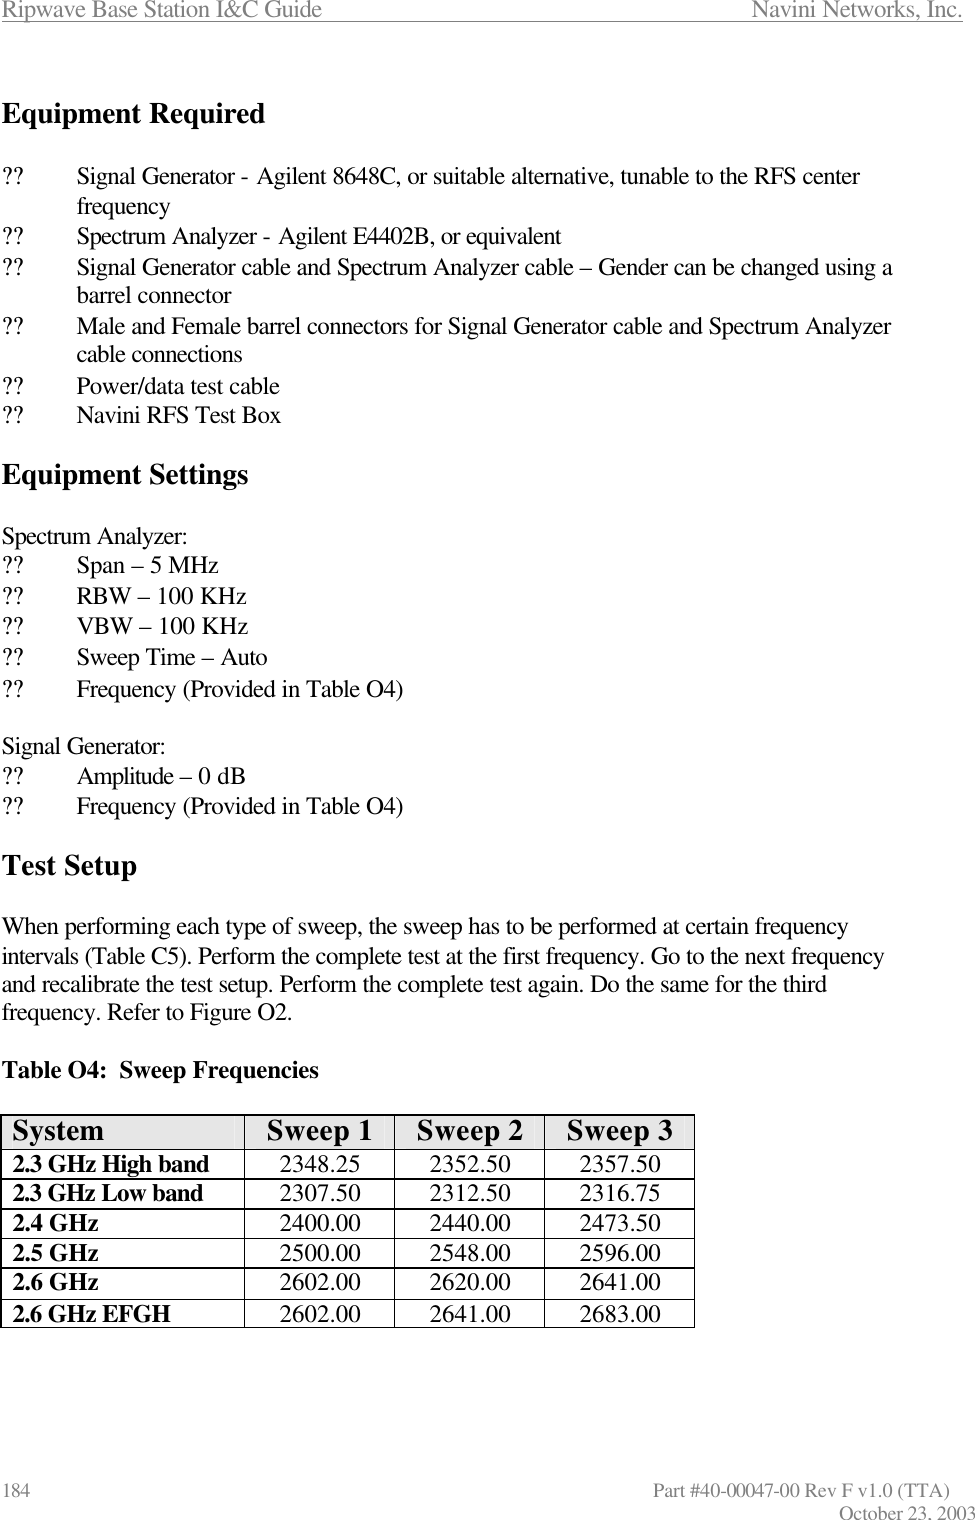 Ripwave Base Station I&amp;C Guide                      Navini Networks, Inc. 184                   Part #40-00047-00 Rev F v1.0 (TTA) October 23, 2003  Equipment Required  ?? Signal Generator - Agilent 8648C, or suitable alternative, tunable to the RFS center frequency ?? Spectrum Analyzer - Agilent E4402B, or equivalent ?? Signal Generator cable and Spectrum Analyzer cable – Gender can be changed using a barrel connector ?? Male and Female barrel connectors for Signal Generator cable and Spectrum Analyzer cable connections ?? Power/data test cable ?? Navini RFS Test Box  Equipment Settings  Spectrum Analyzer: ?? Span – 5 MHz      ?? RBW – 100 KHz ?? VBW – 100 KHz ?? Sweep Time – Auto ?? Frequency (Provided in Table O4)  Signal Generator: ?? Amplitude – 0 dB ?? Frequency (Provided in Table O4)  Test Setup  When performing each type of sweep, the sweep has to be performed at certain frequency intervals (Table C5). Perform the complete test at the first frequency. Go to the next frequency and recalibrate the test setup. Perform the complete test again. Do the same for the third frequency. Refer to Figure O2.  Table O4:  Sweep Frequencies  System Sweep 1 Sweep 2 Sweep 3 2.3 GHz High band 2348.25  2352.50  2357.50 2.3 GHz Low band 2307.50  2312.50  2316.75 2.4 GHz 2400.00  2440.00  2473.50 2.5 GHz 2500.00  2548.00  2596.00 2.6 GHz 2602.00  2620.00  2641.00 2.6 GHz EFGH 2602.00  2641.00  2683.00    